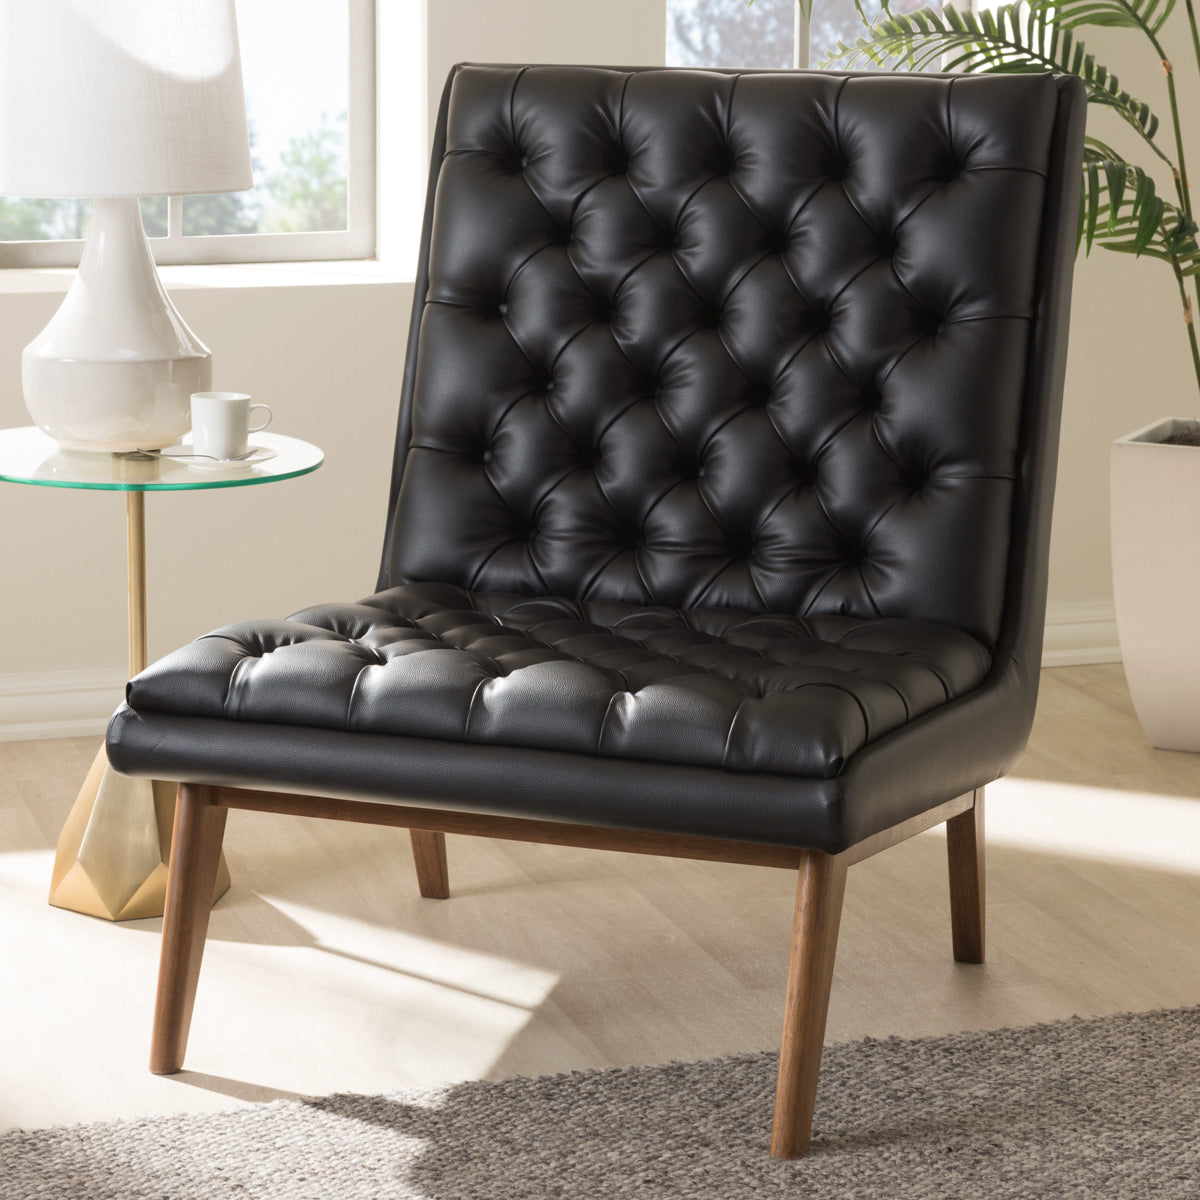 Baxton Studio Annetha Mid-Century Modern Black Faux Leather Upholstered Walnut Finished Wood Lounge Chair Baxton Studio-chairs-Minimal And Modern - 7